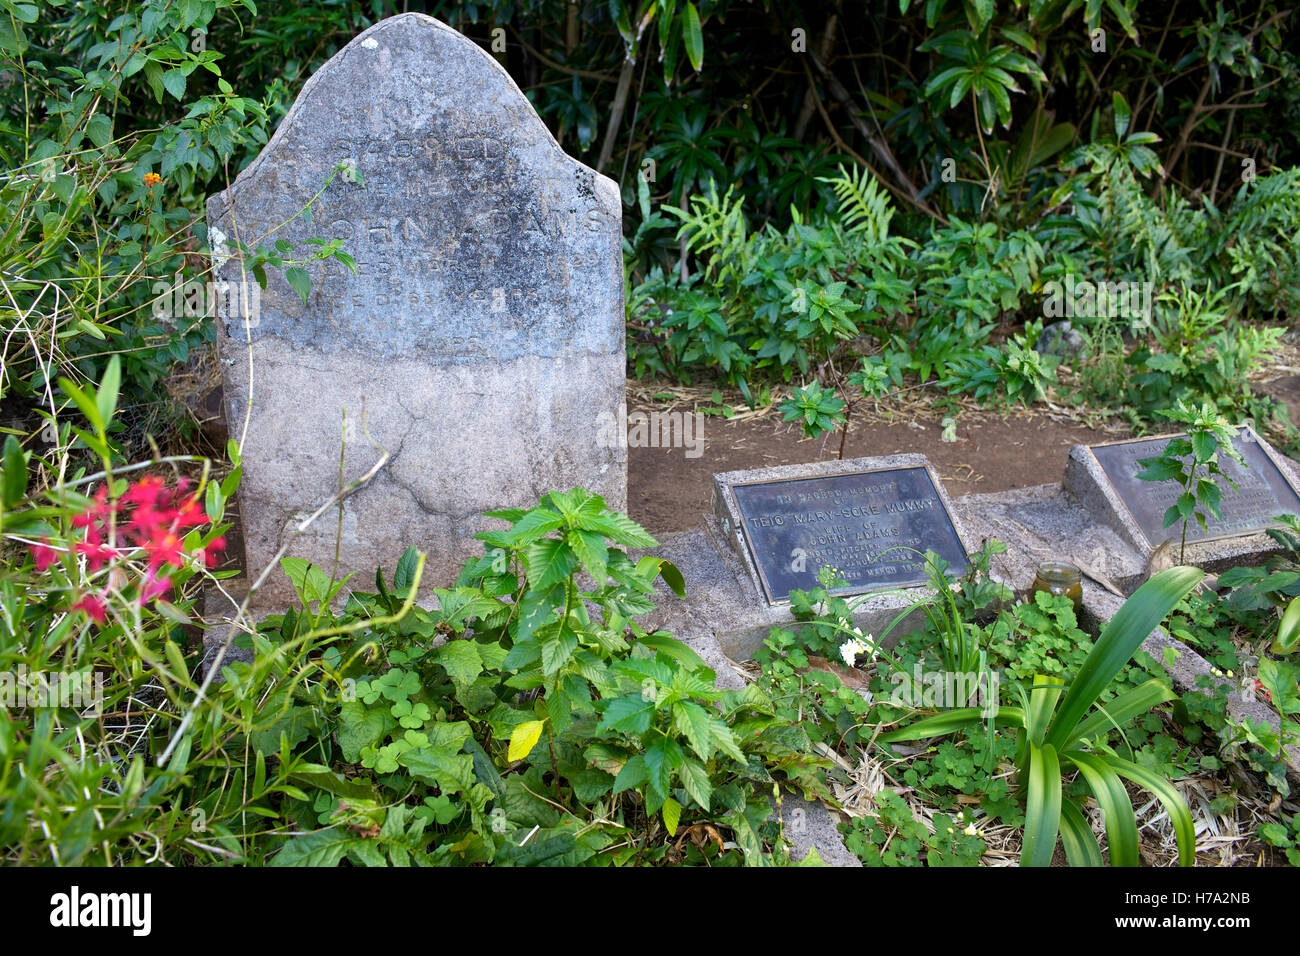 Pitcairn, sons of mutineers! -  01/06/2012  -  Pitcairn / Pitcairn  -  The grave of John Adams, only survivor after 'wars' of Pitcairn   -  Olivier Goujon / Le Pictorium Stock Photo